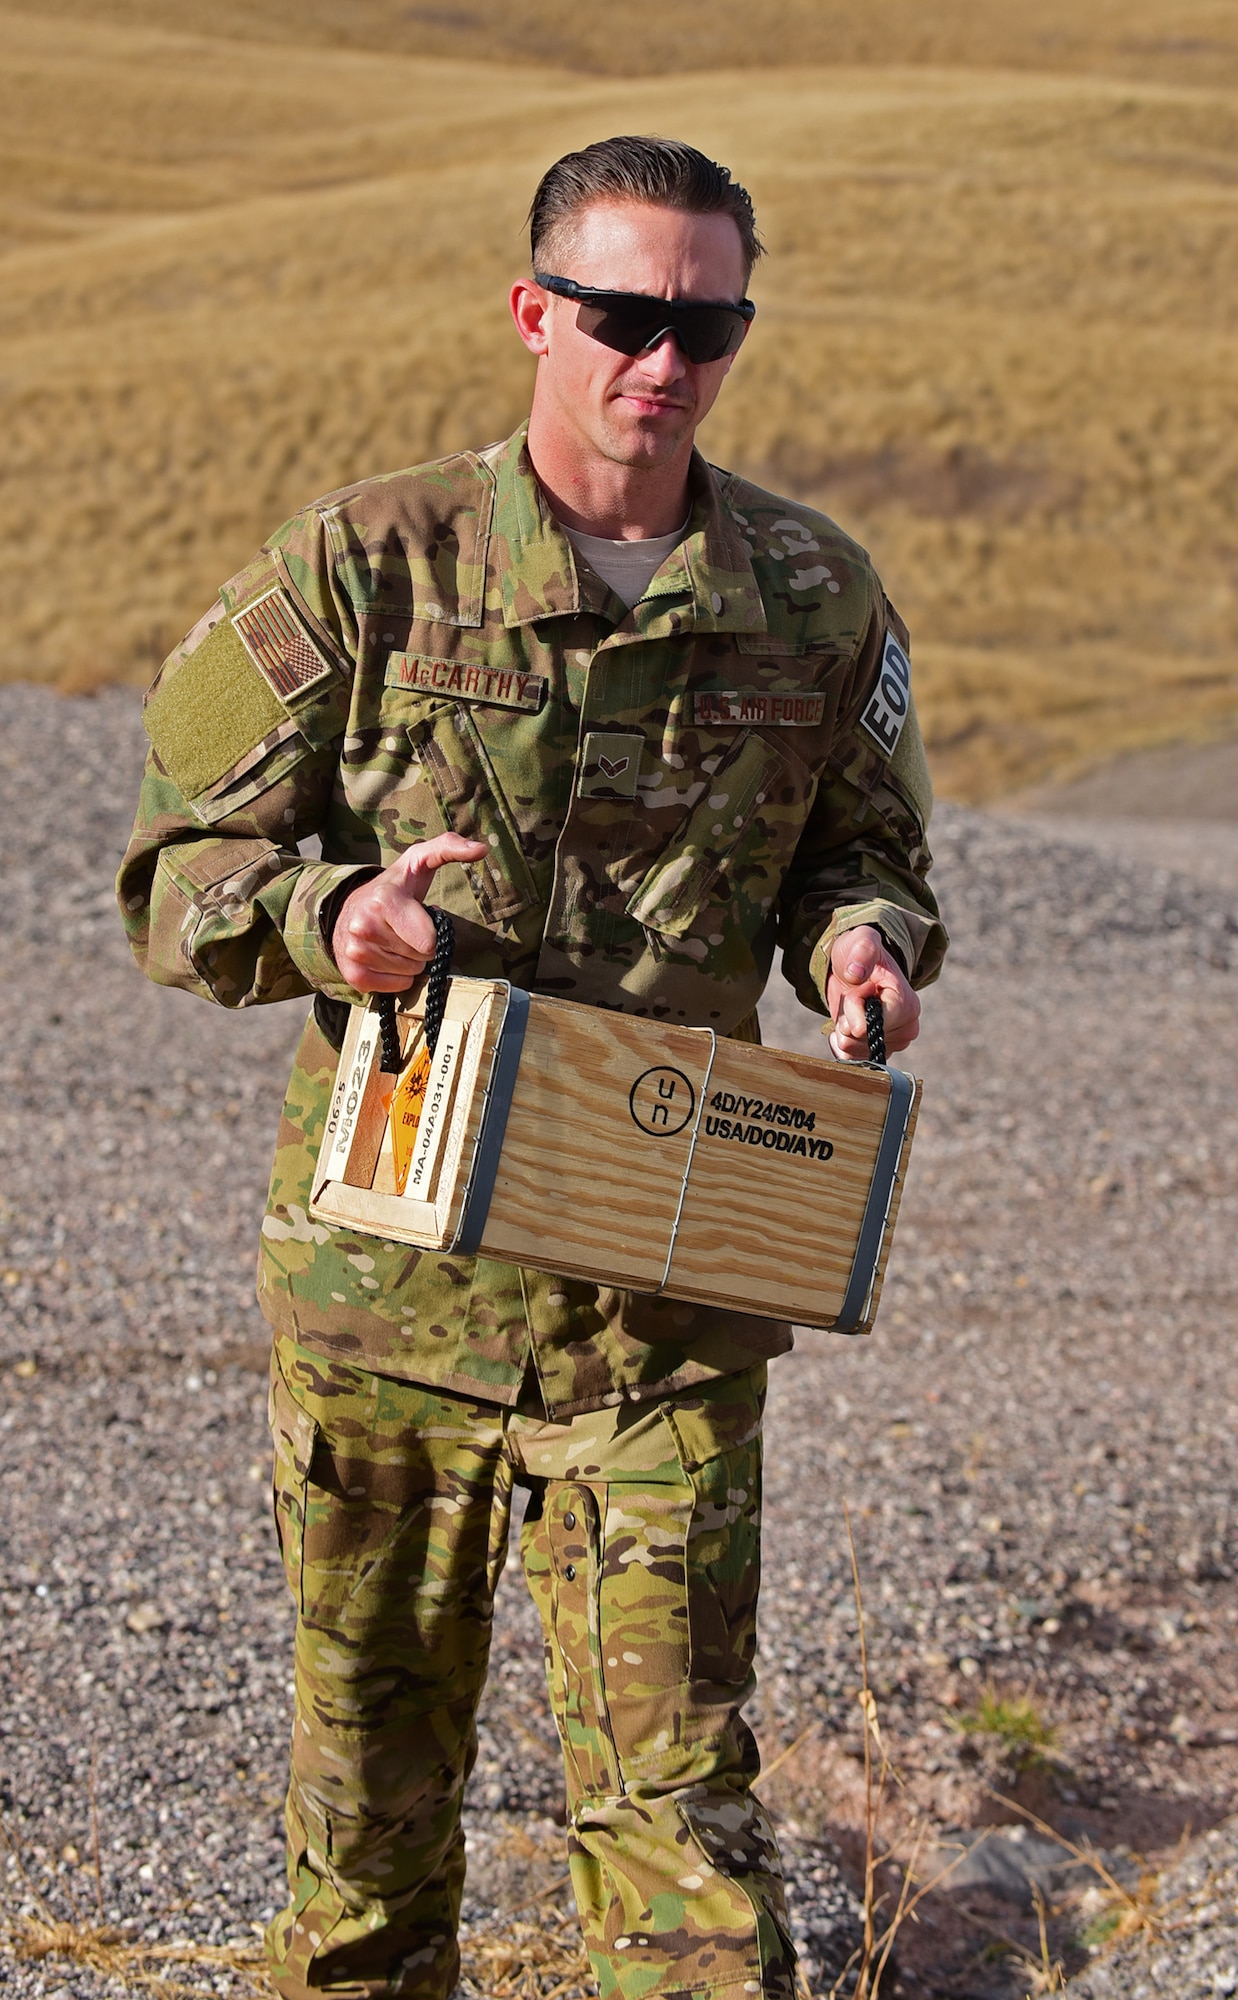 Senior Airman Zachary McCarthy, explosive ordnance disposal apprentice assigned to the 28th Civil Engineer Squadron, carries a box of explosives at Ellsworth Air Force Base S.D., Nov. 14, 2016. The box contains a plastic explosive used to detonate unexploded ordinance. (U.S. Air Force photo by Airman 1st Class James L. Miller)